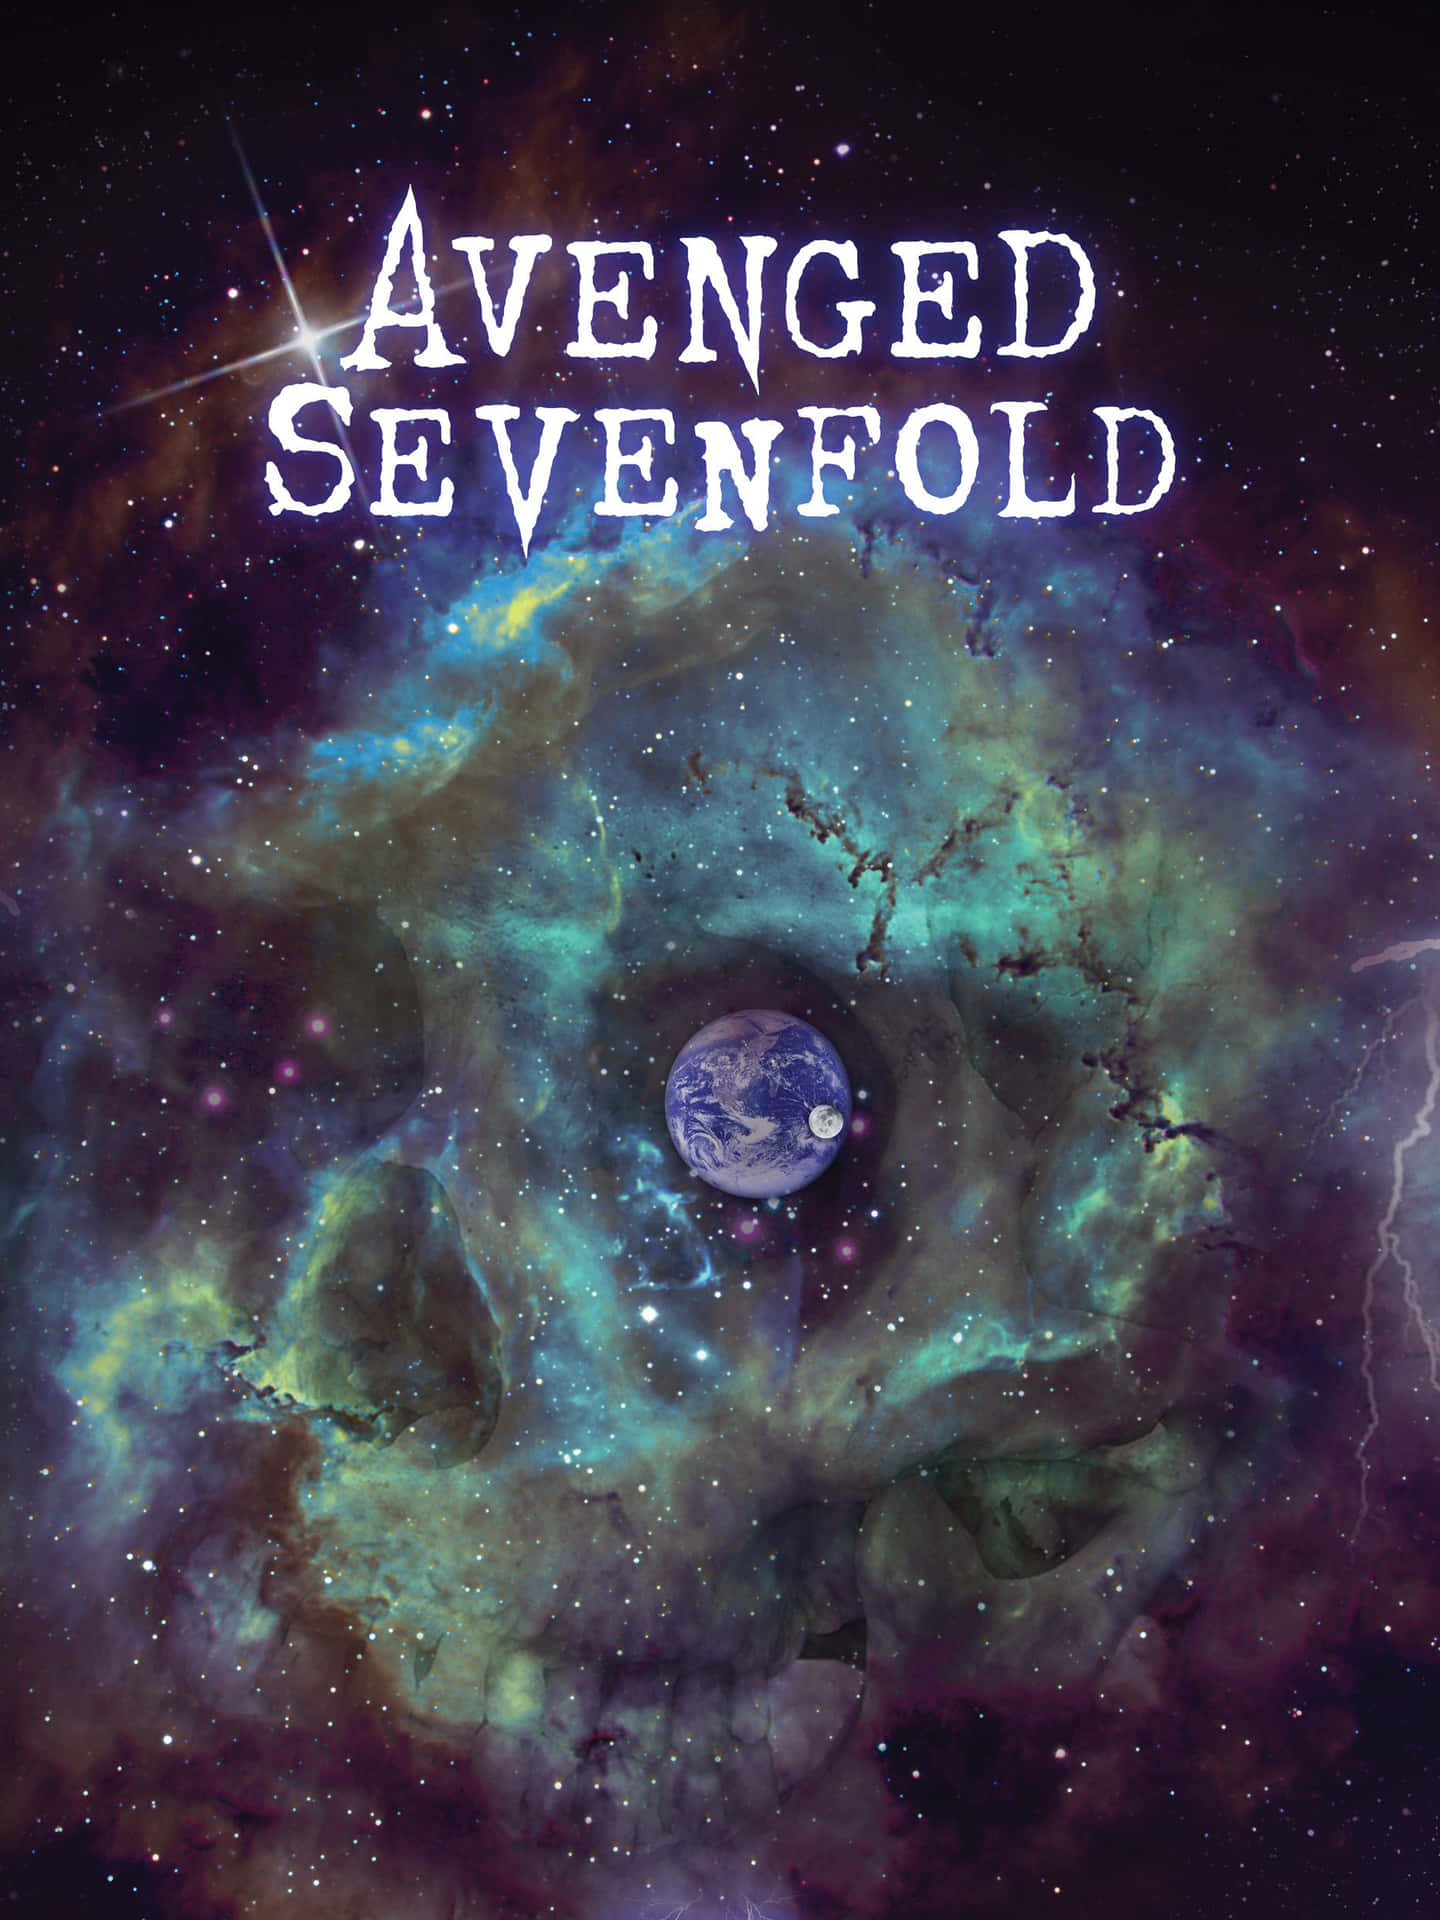 Make a Statement with this Avenged Sevenfold iPhone Wallpaper Wallpaper